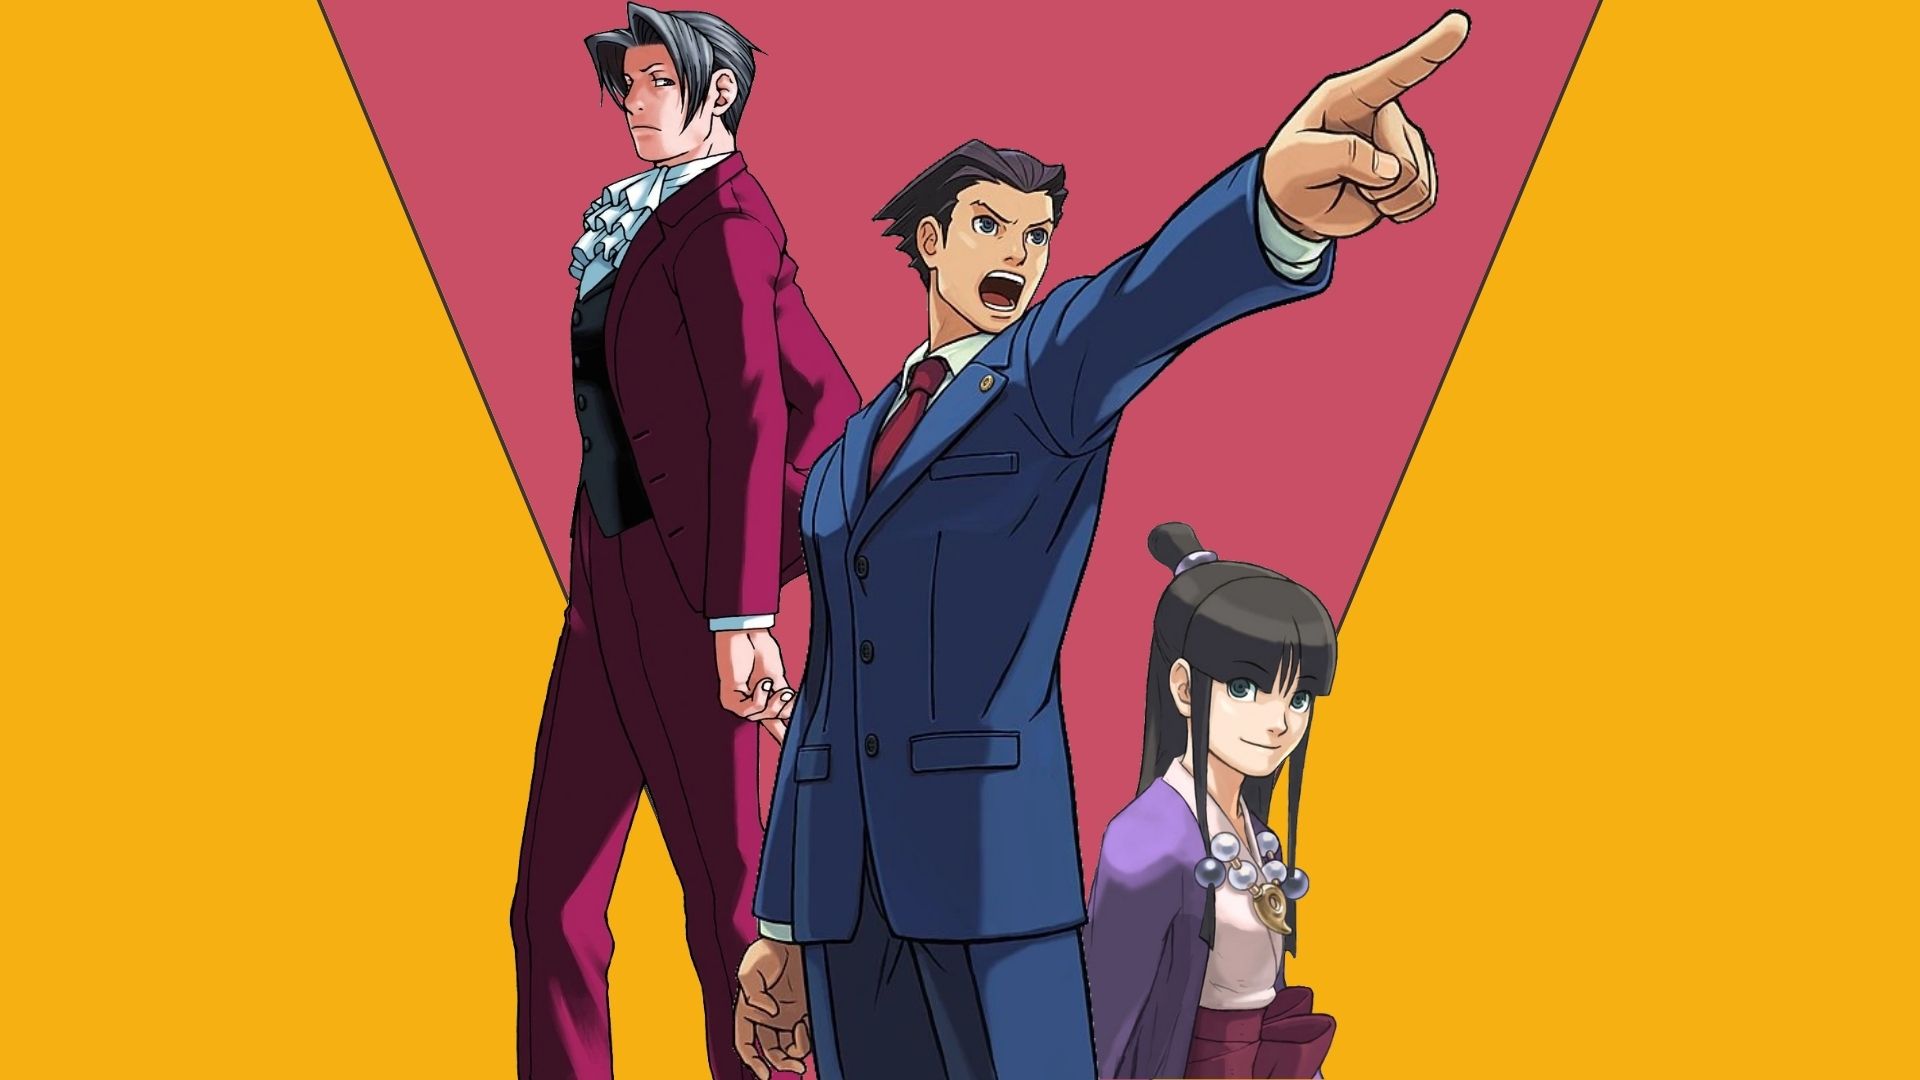 Phoenix Wright: Ace Attorney Trilogy [Online Game Code]